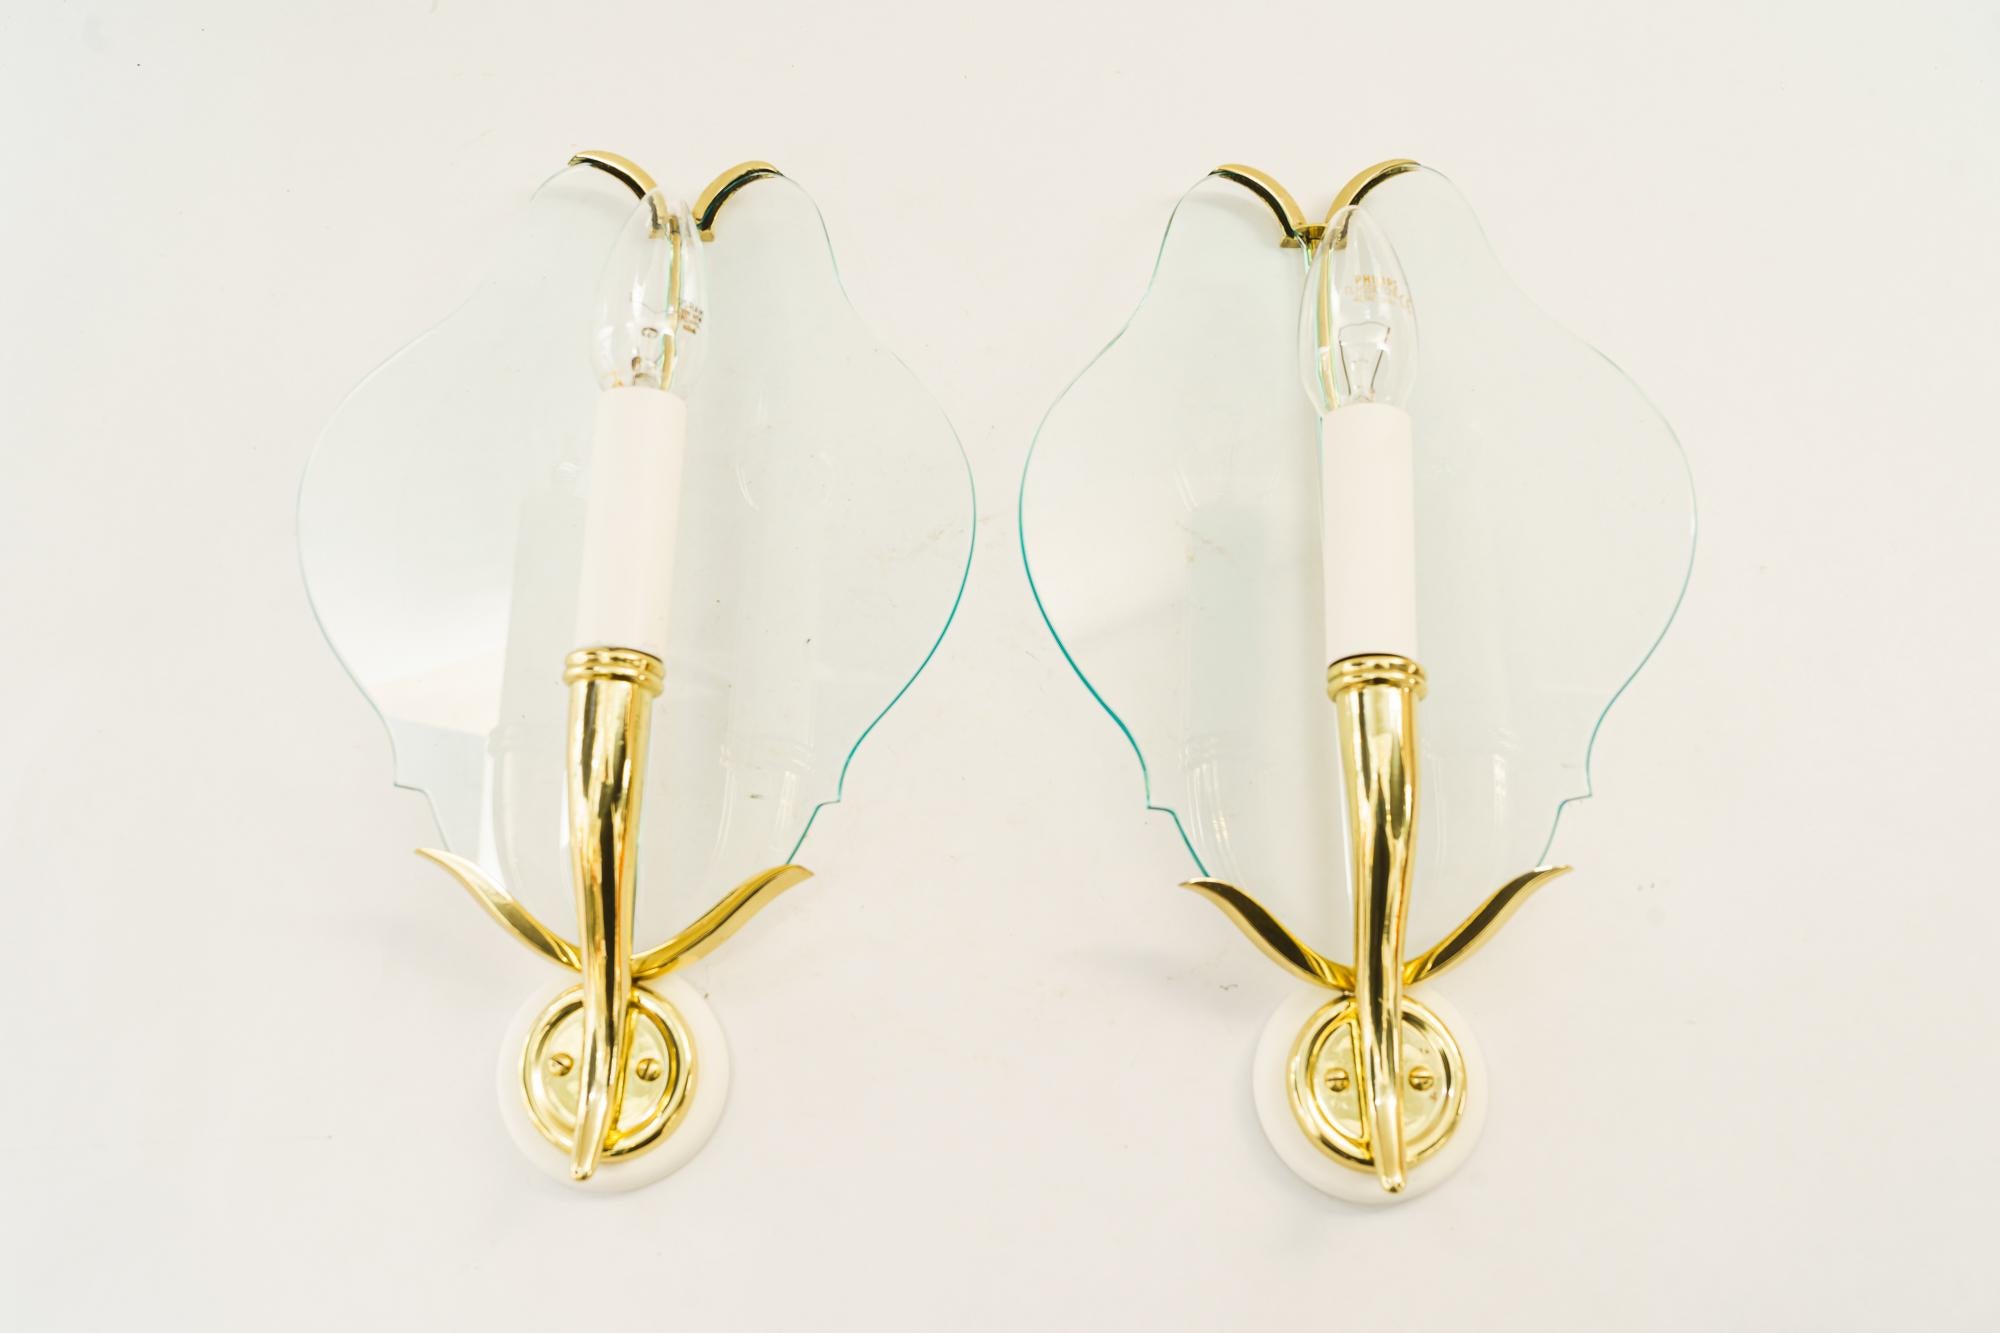 2 Rare wall lamps with original glass shades vienna around 1950s
Brass polished and stove enameled
